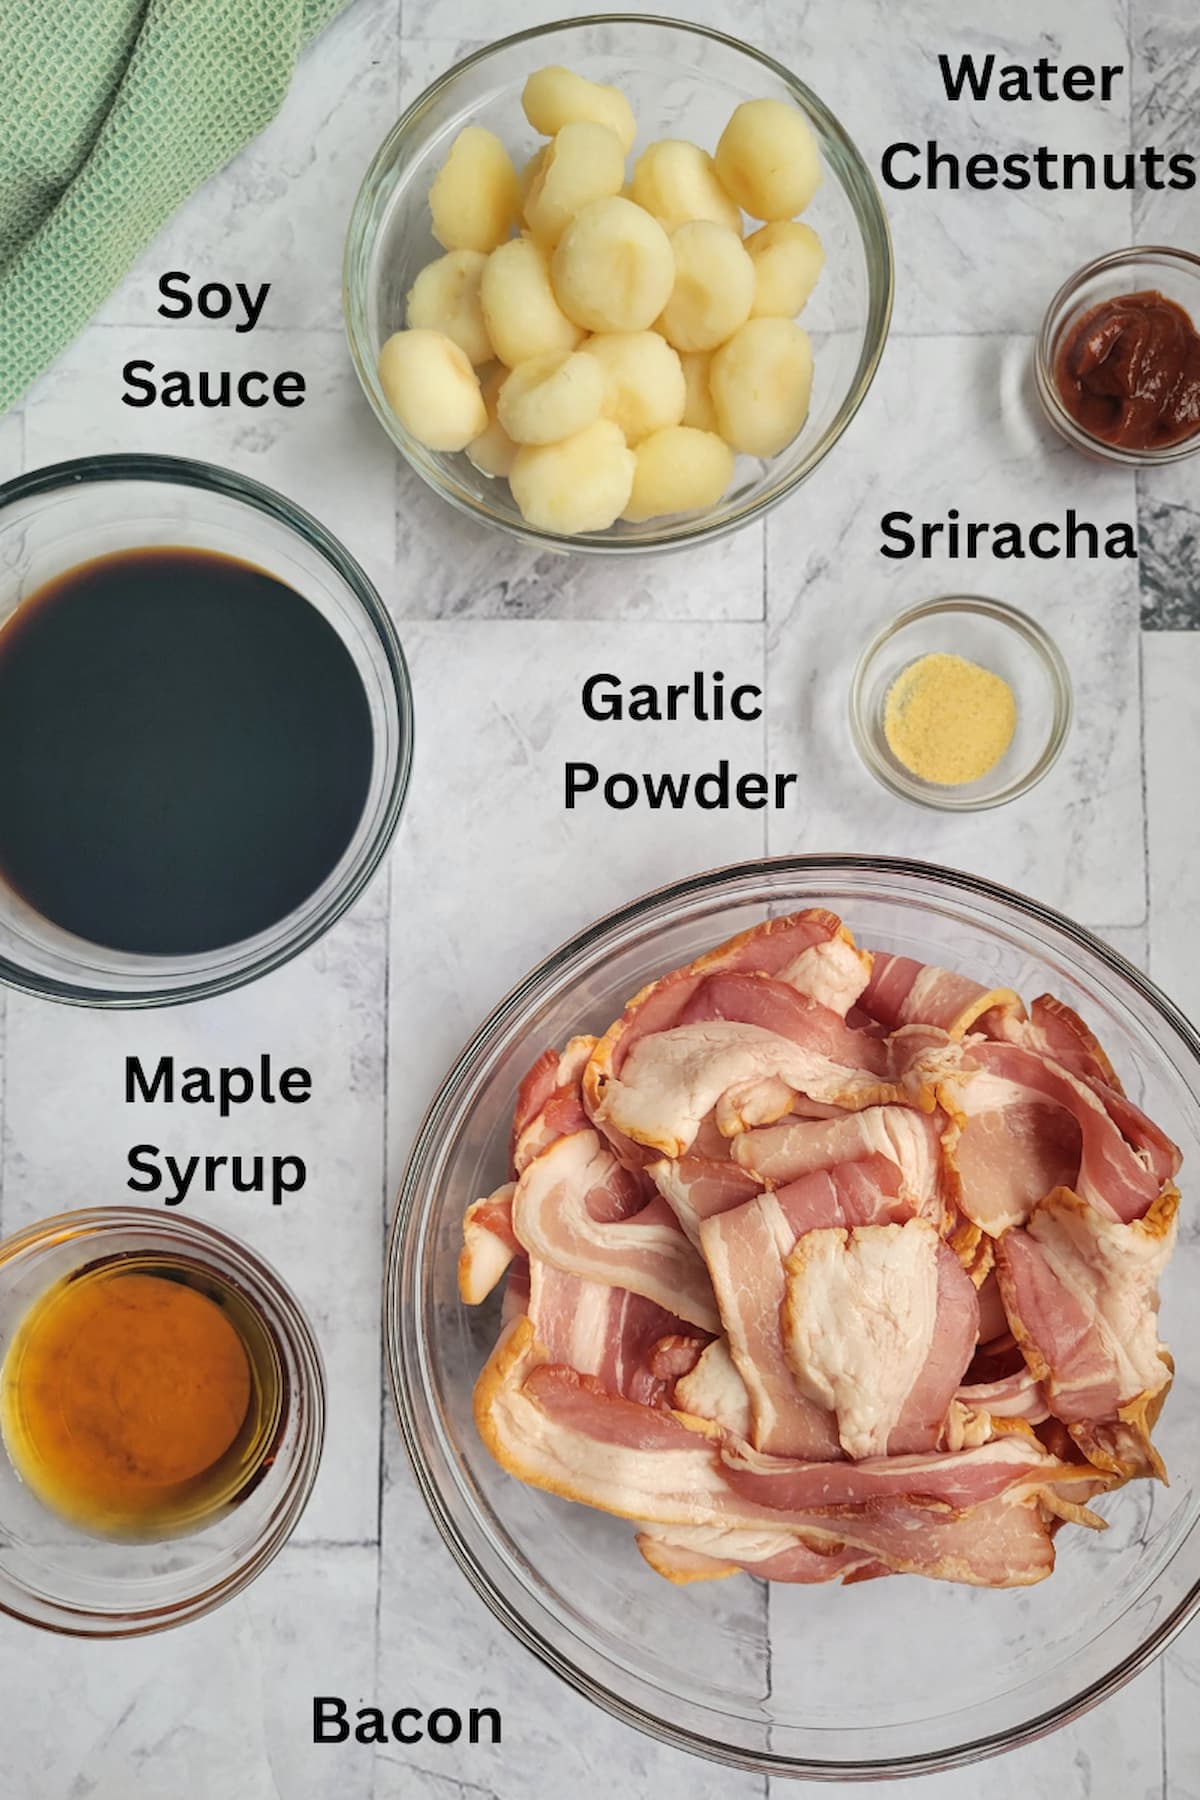 ingredients for bacon wrapped water chestnuts - water chestnuts, bacon, garlic powder, sriracha, soy sauce, maple syrup